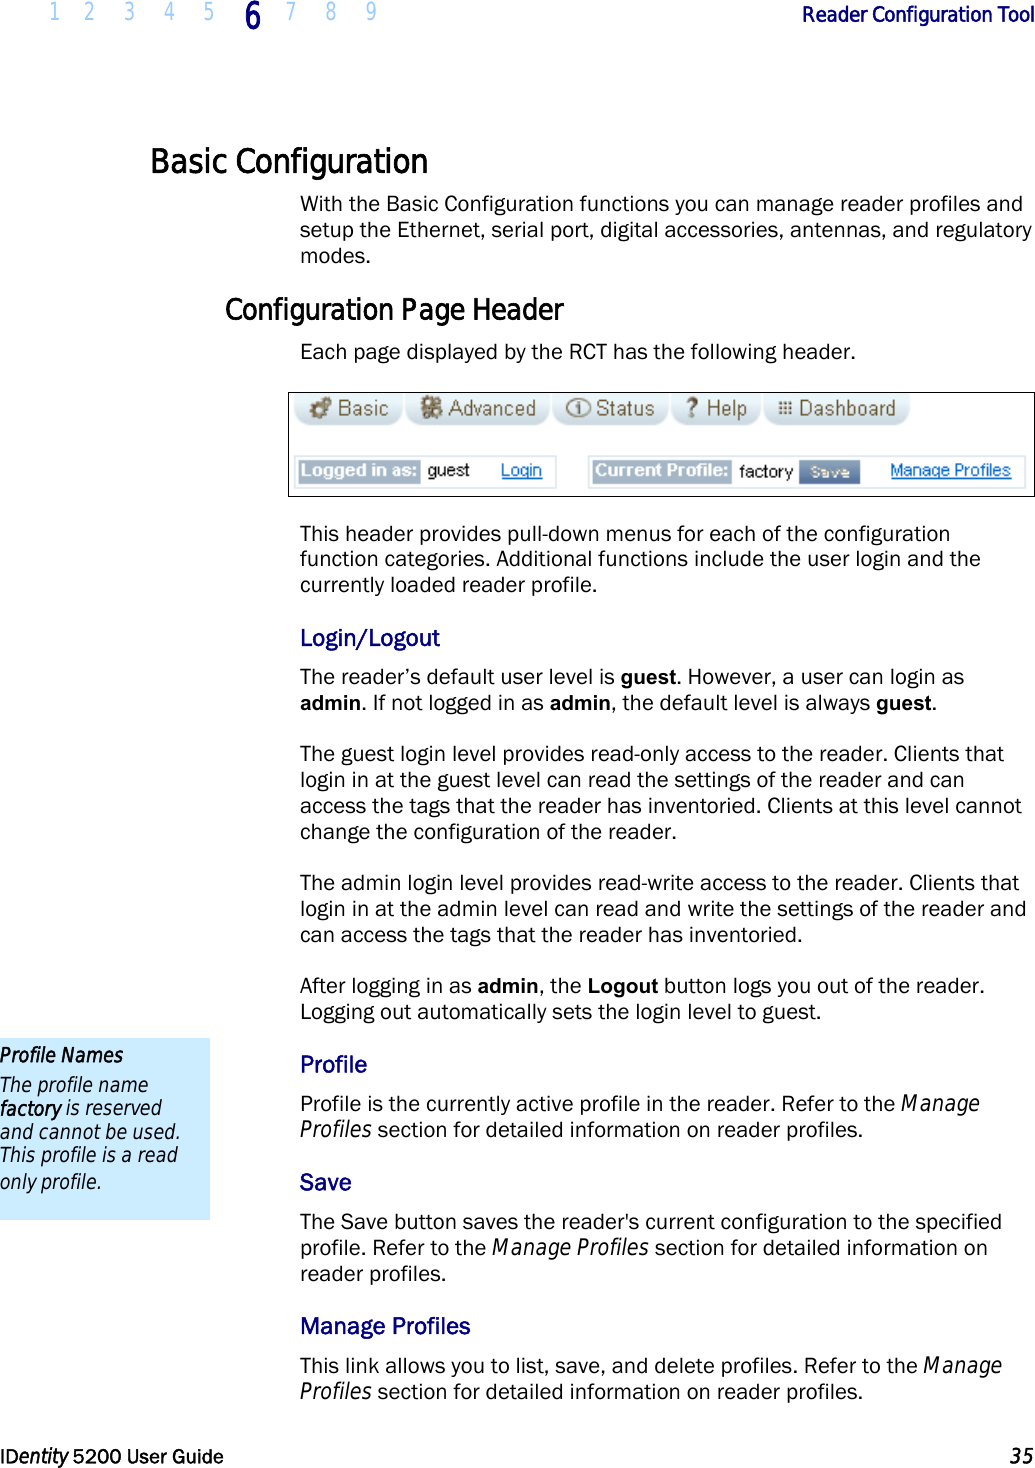  1 2 3 4 5 6 7 8 9       Reader Configuration Tool   IDentity 5200 User Guide  35  Basic Configuration With the Basic Configuration functions you can manage reader profiles and setup the Ethernet, serial port, digital accessories, antennas, and regulatory modes. Configuration Page Header Each page displayed by the RCT has the following header.  This header provides pull-down menus for each of the configuration function categories. Additional functions include the user login and the currently loaded reader profile. Login/Logout The reader’s default user level is guest. However, a user can login as admin. If not logged in as admin, the default level is always guest. The guest login level provides read-only access to the reader. Clients that login in at the guest level can read the settings of the reader and can access the tags that the reader has inventoried. Clients at this level cannot change the configuration of the reader. The admin login level provides read-write access to the reader. Clients that login in at the admin level can read and write the settings of the reader and can access the tags that the reader has inventoried.  After logging in as admin, the Logout button logs you out of the reader. Logging out automatically sets the login level to guest. Profile Profile is the currently active profile in the reader. Refer to the Manage Profiles section for detailed information on reader profiles. Save The Save button saves the reader&apos;s current configuration to the specified profile. Refer to the Manage Profiles section for detailed information on reader profiles. Manage Profiles This link allows you to list, save, and delete profiles. Refer to the Manage Profiles section for detailed information on reader profiles. Profile Names The profile name factory is reserved and cannot be used. This profile is a read only profile. 